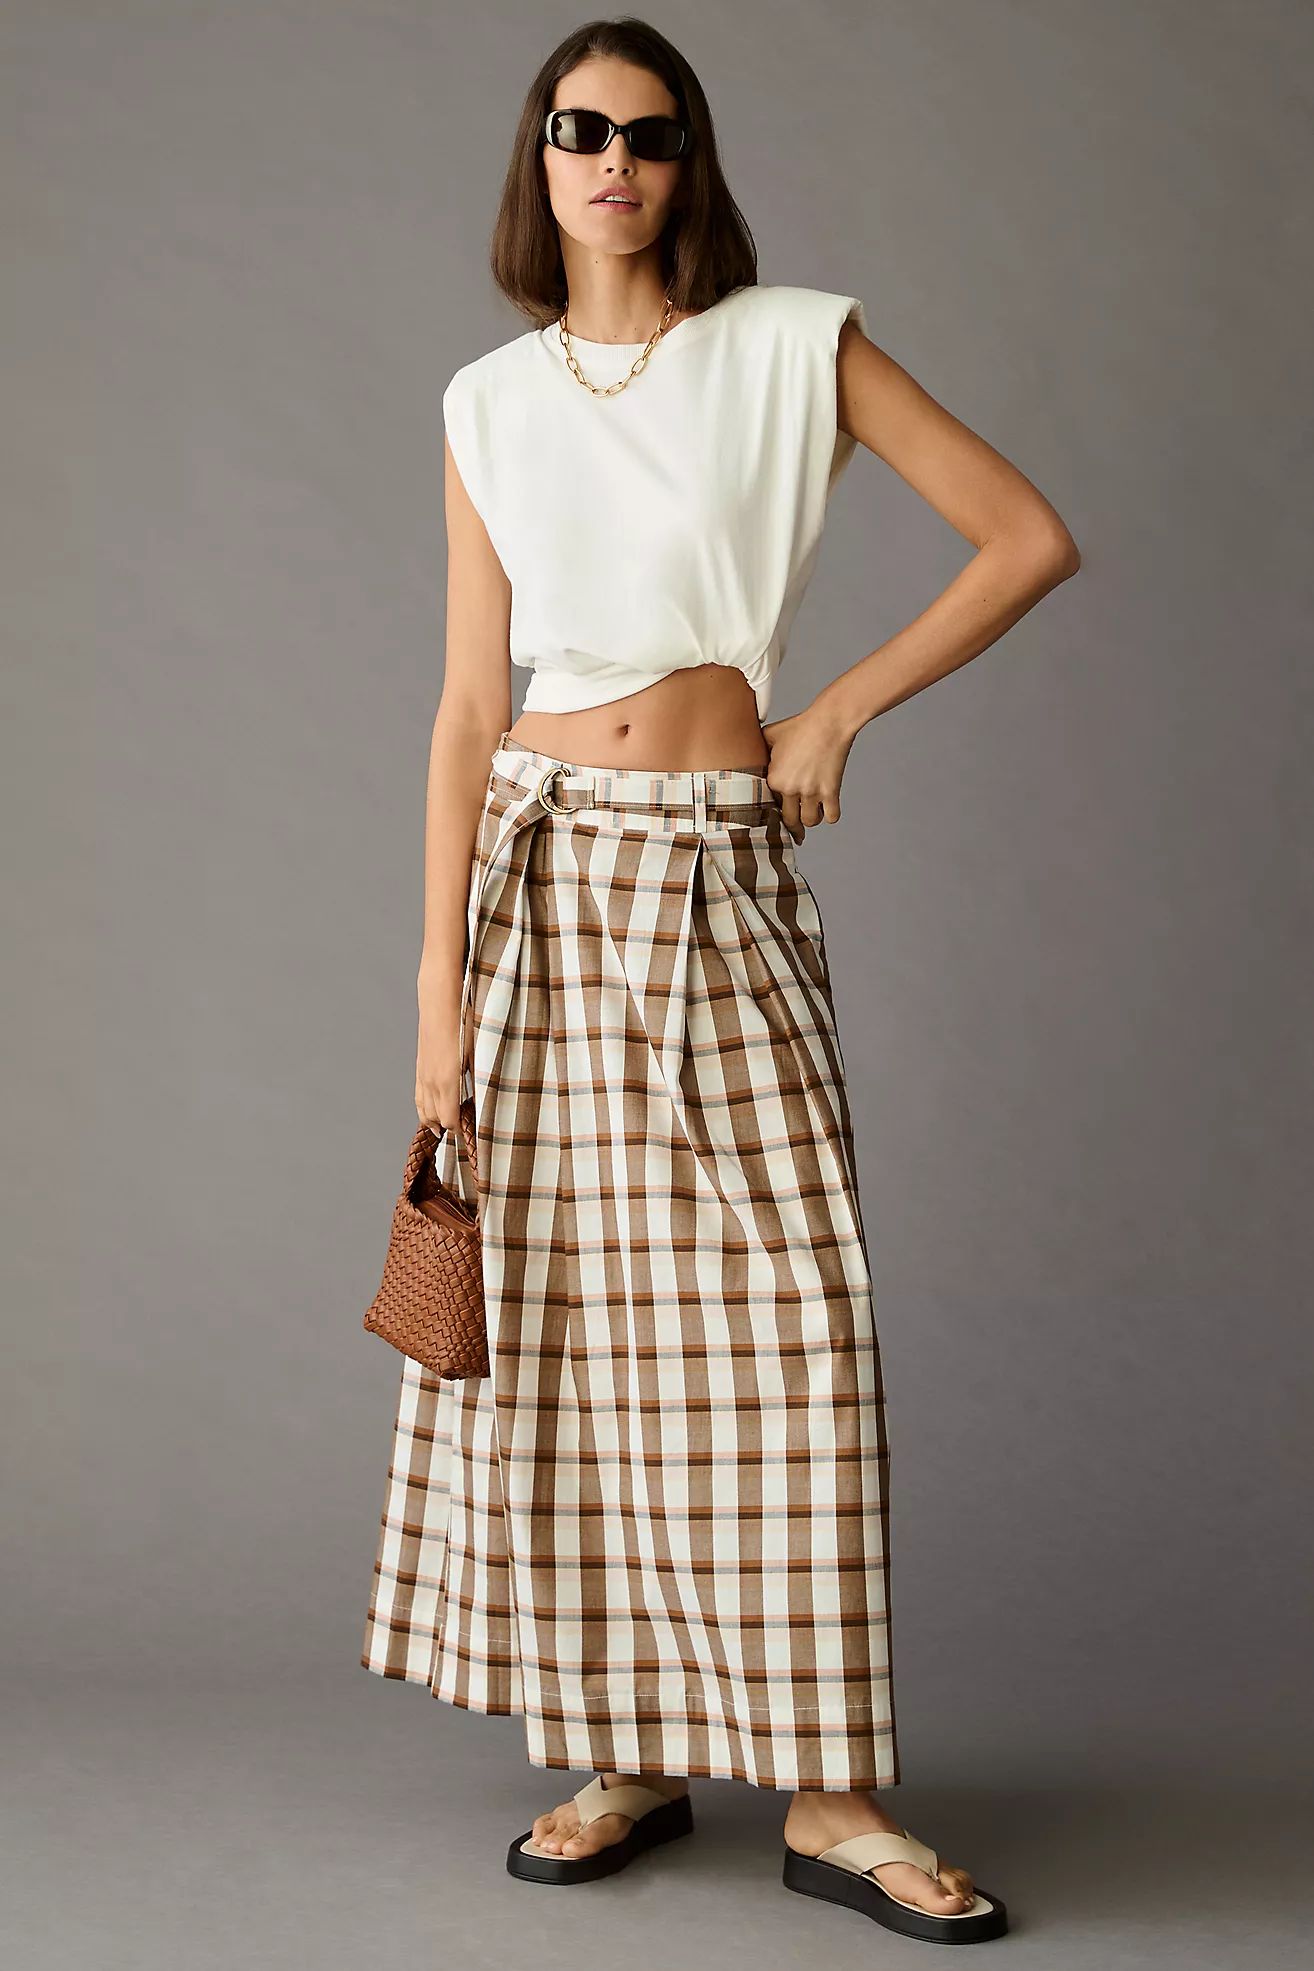 Maeve Pleated A-Line Skirt | Anthropologie (US)